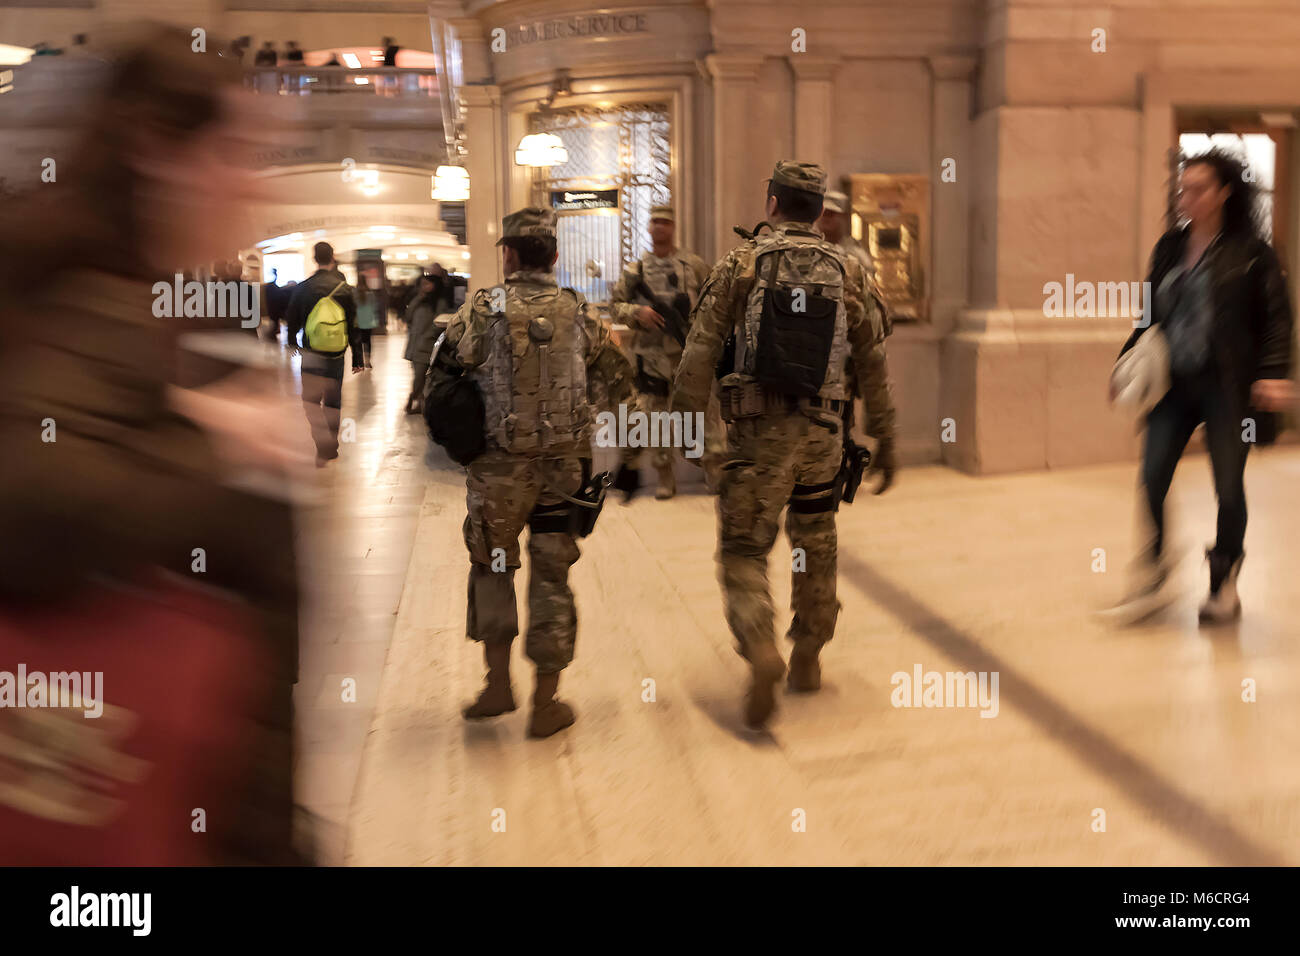 Army National Guard Offiziere patrouillieren, Grand Central Station, New York, NY, USA. Stockfoto